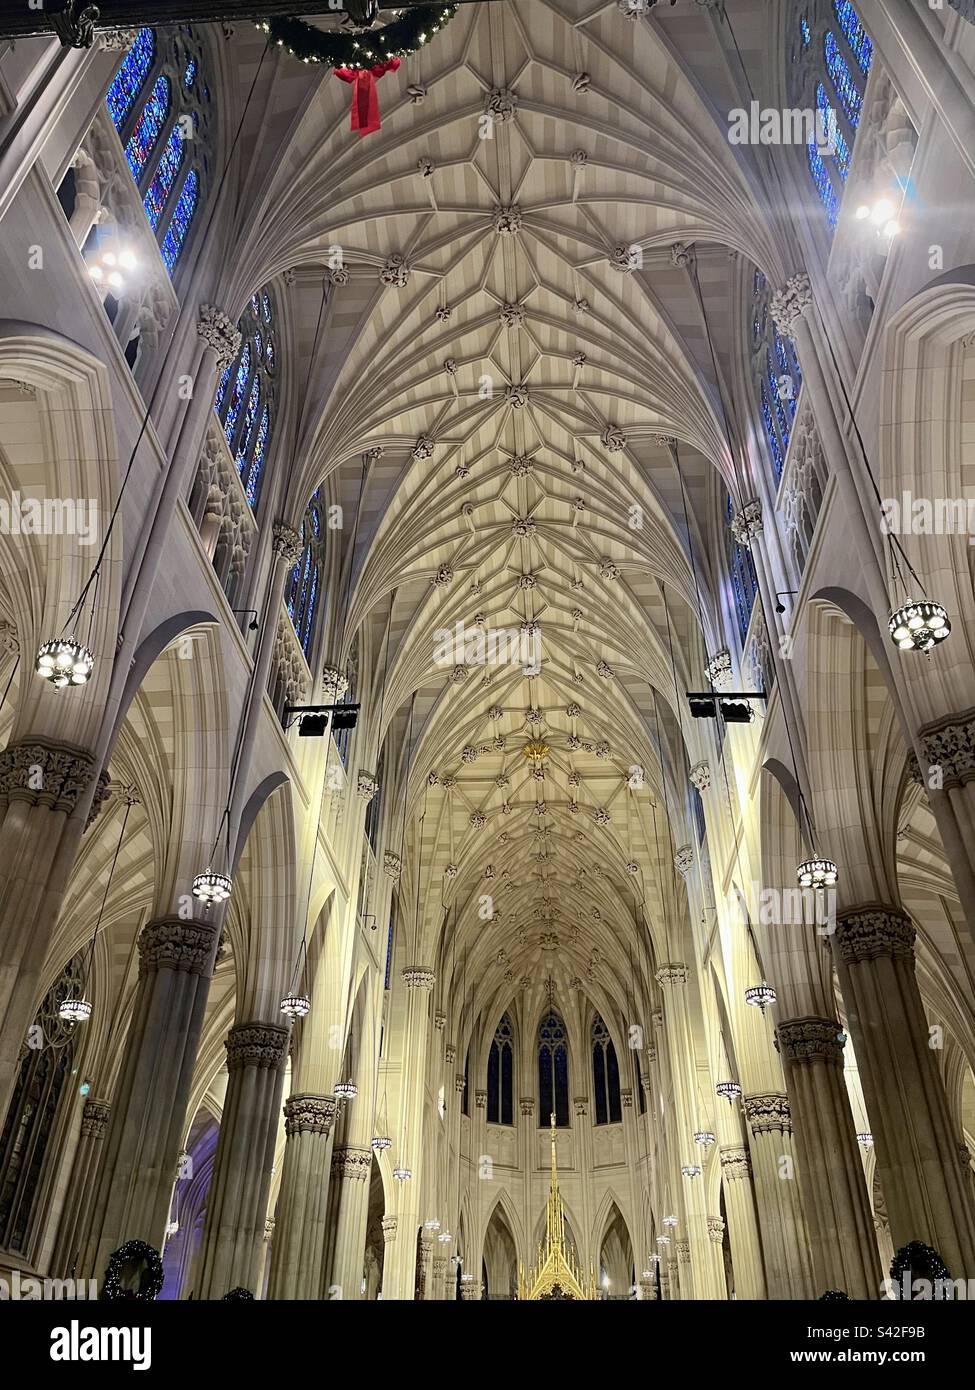 Interior architecture of St. Patrick's Cathedral in New York. Photo taken in New York in December 2022 Stock Photo